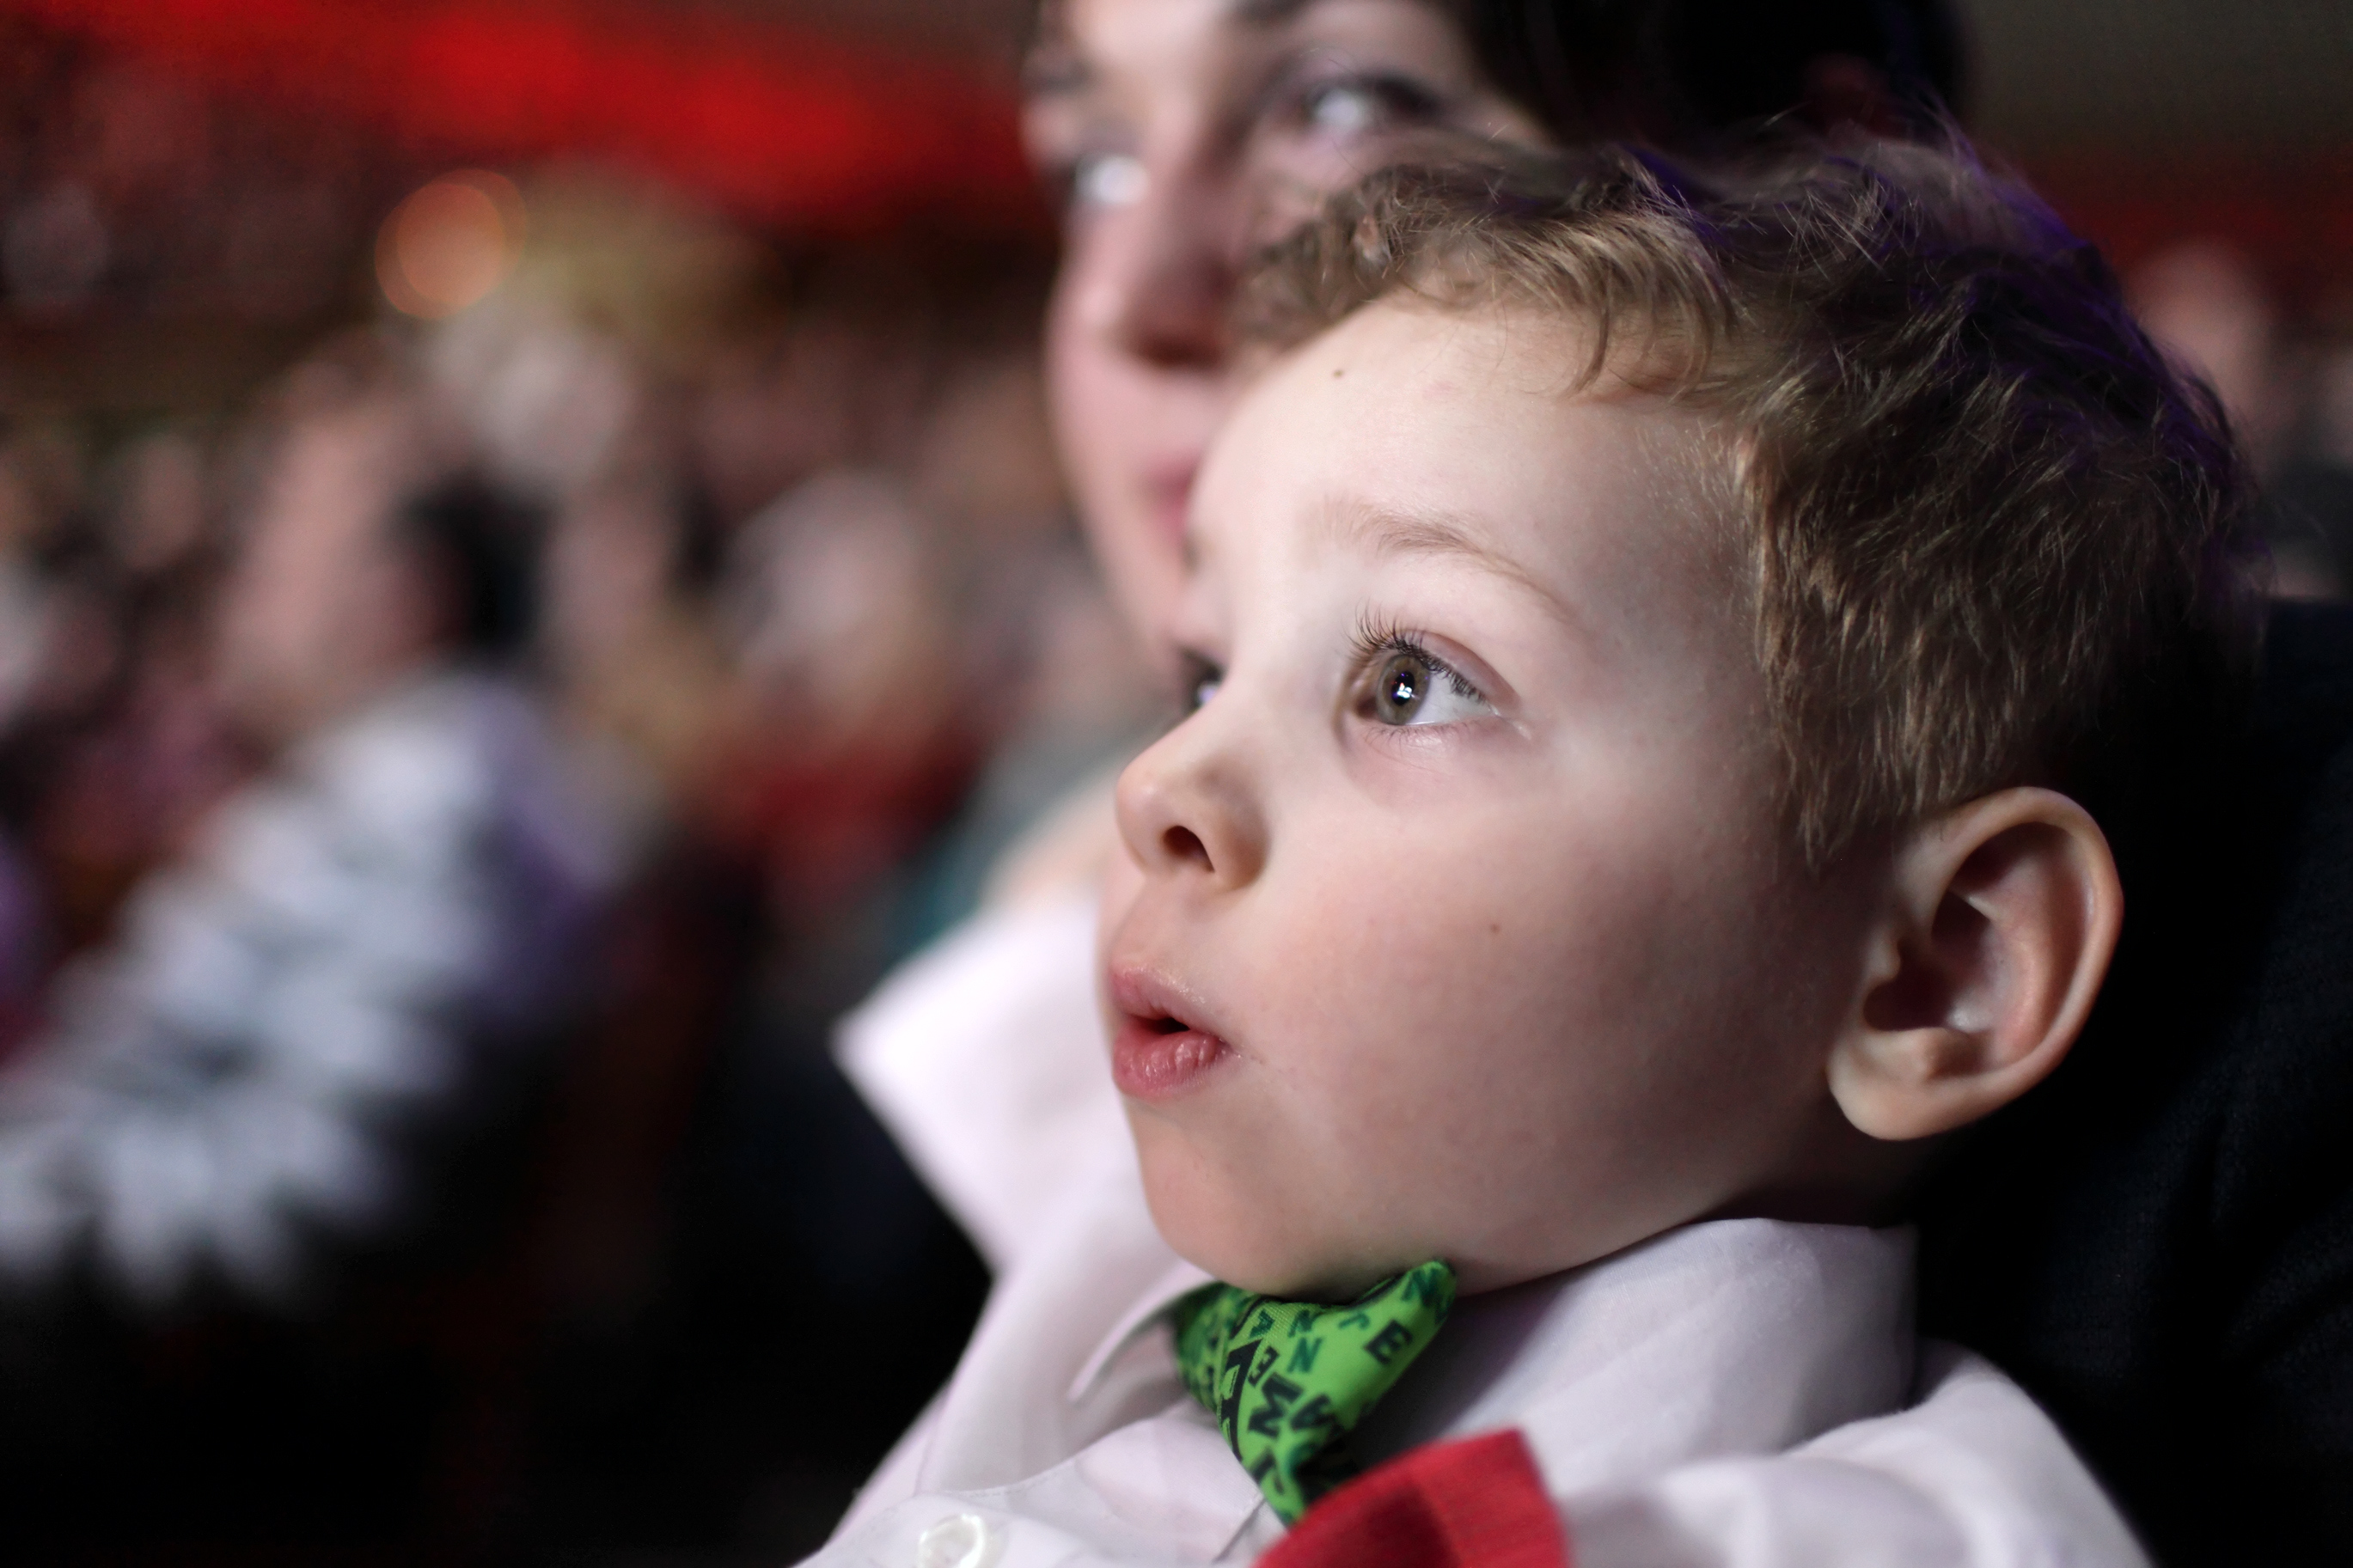 Little boy looking at show with wide eyes while wearing a bow tie